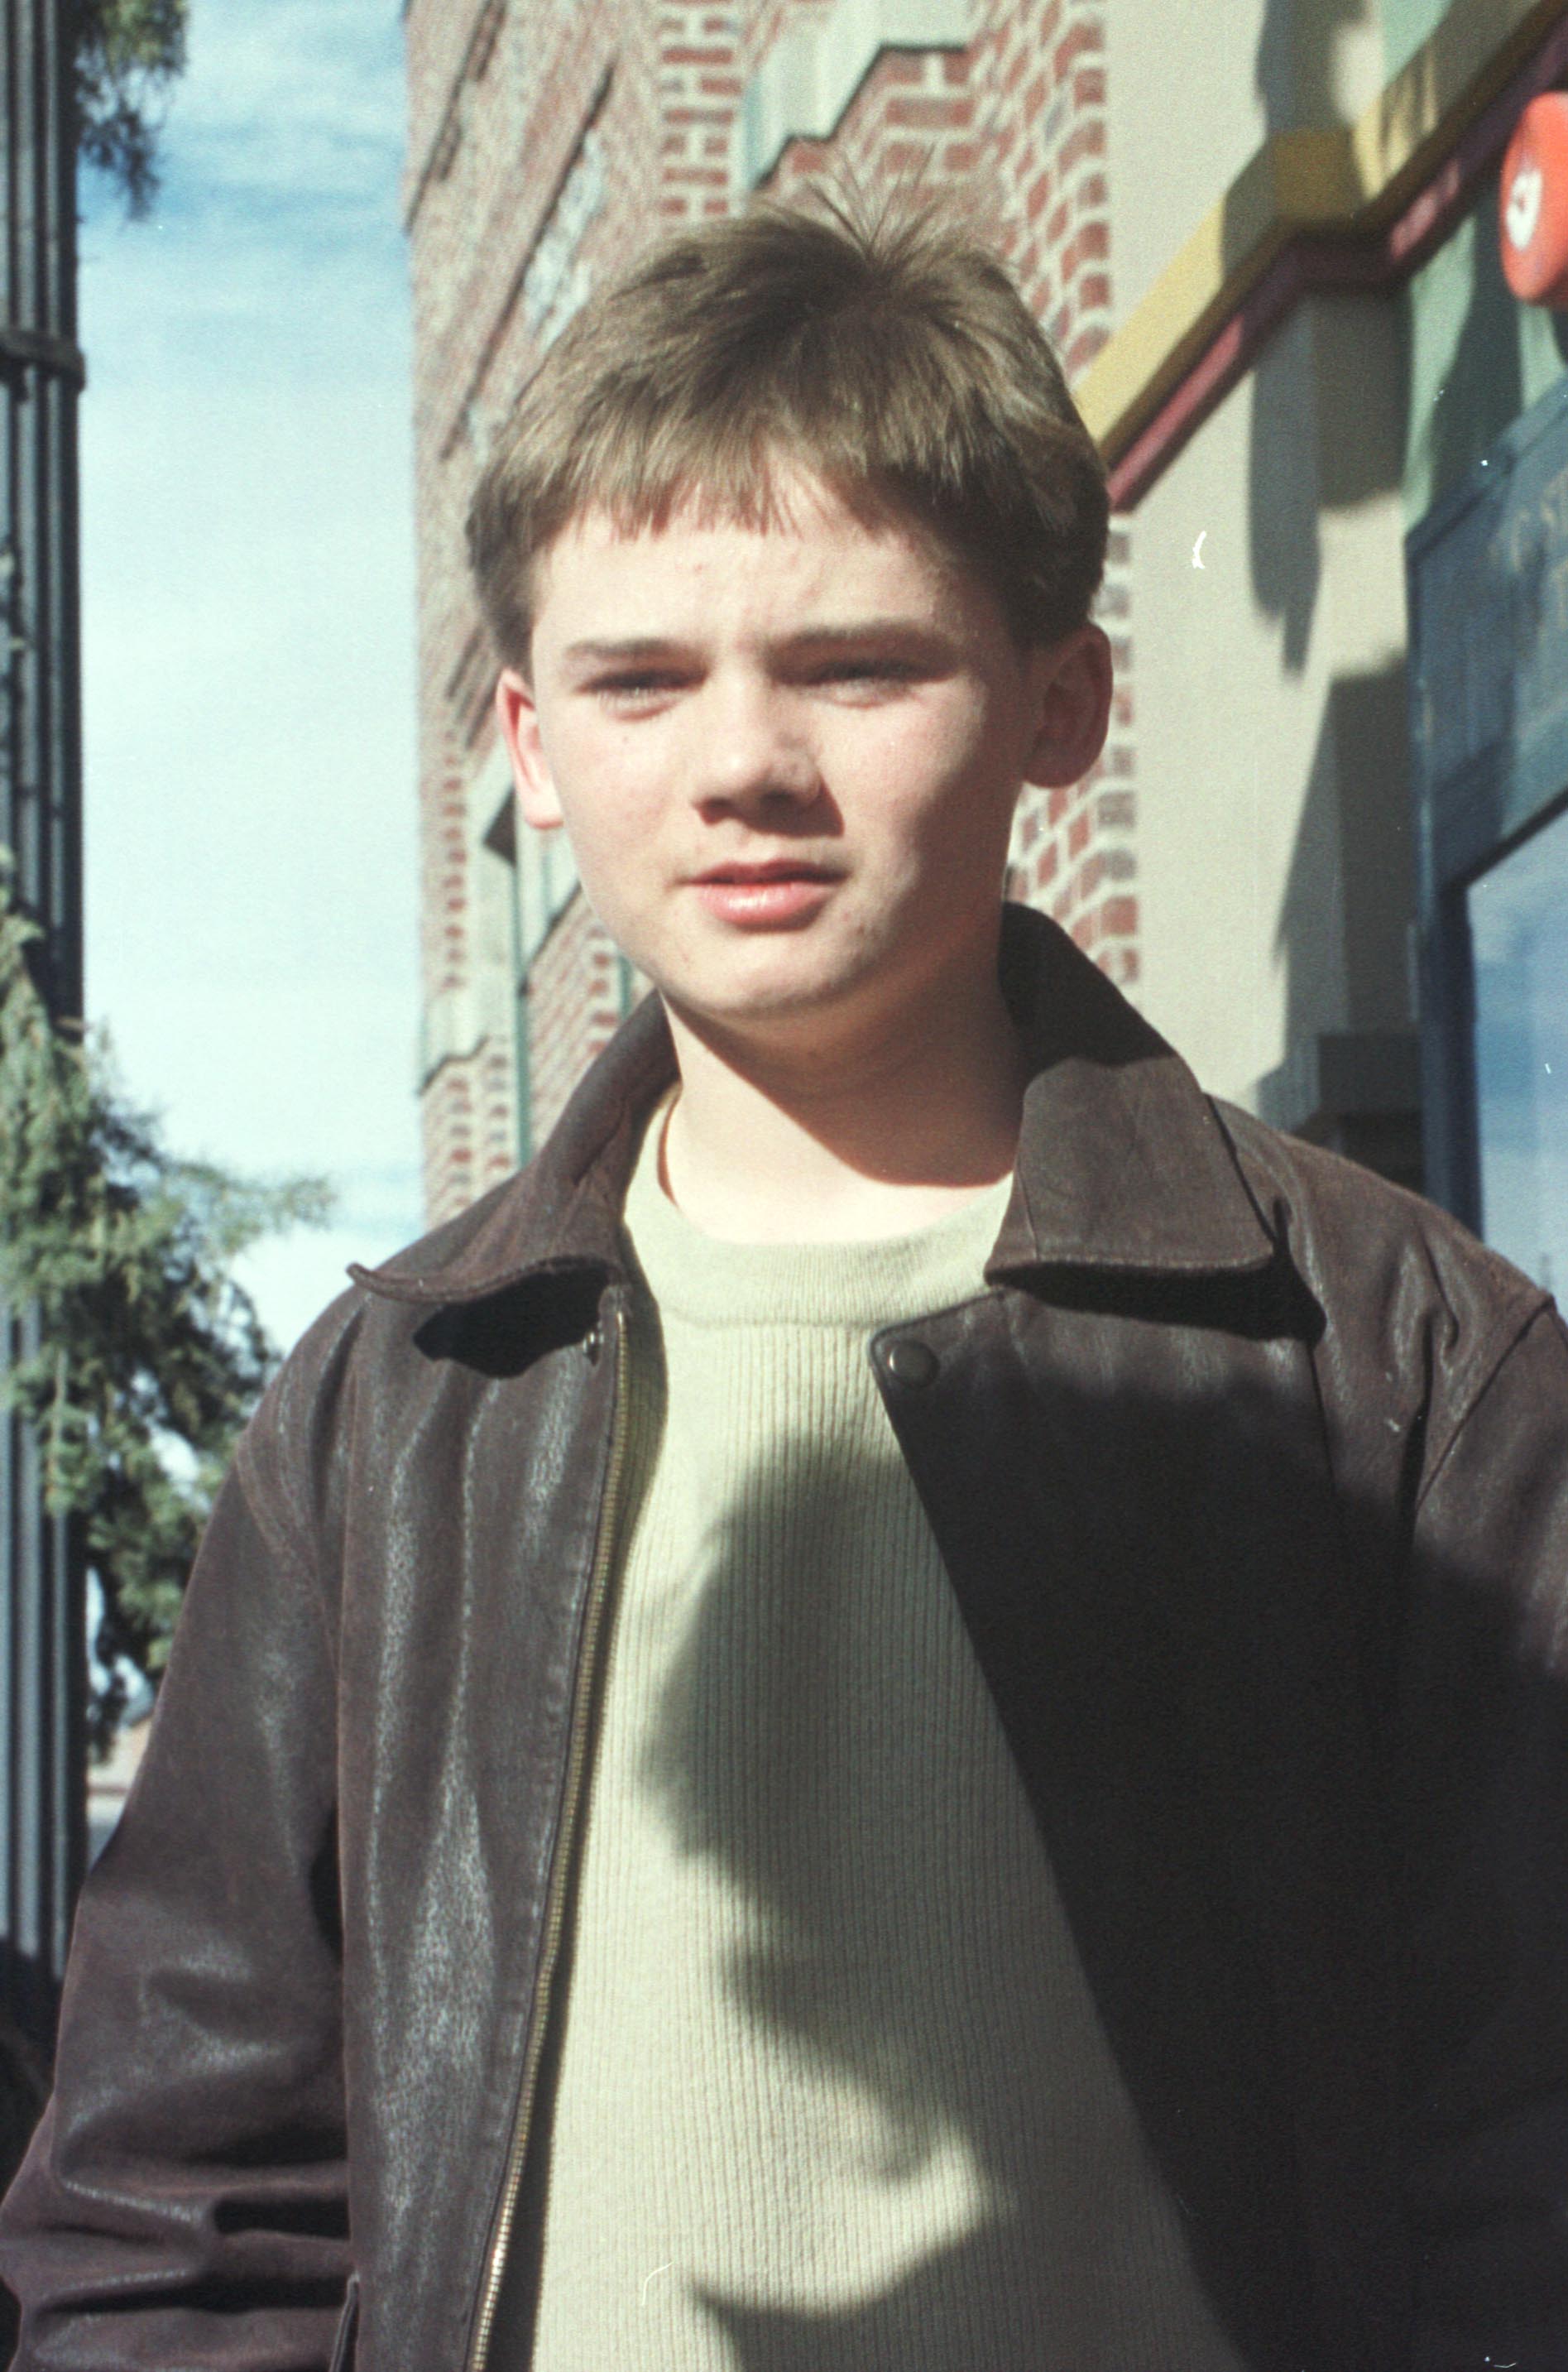 Jake Lloyd attends the screening of his new movie "Madison" on January 24, 2001 | Source: Getty images